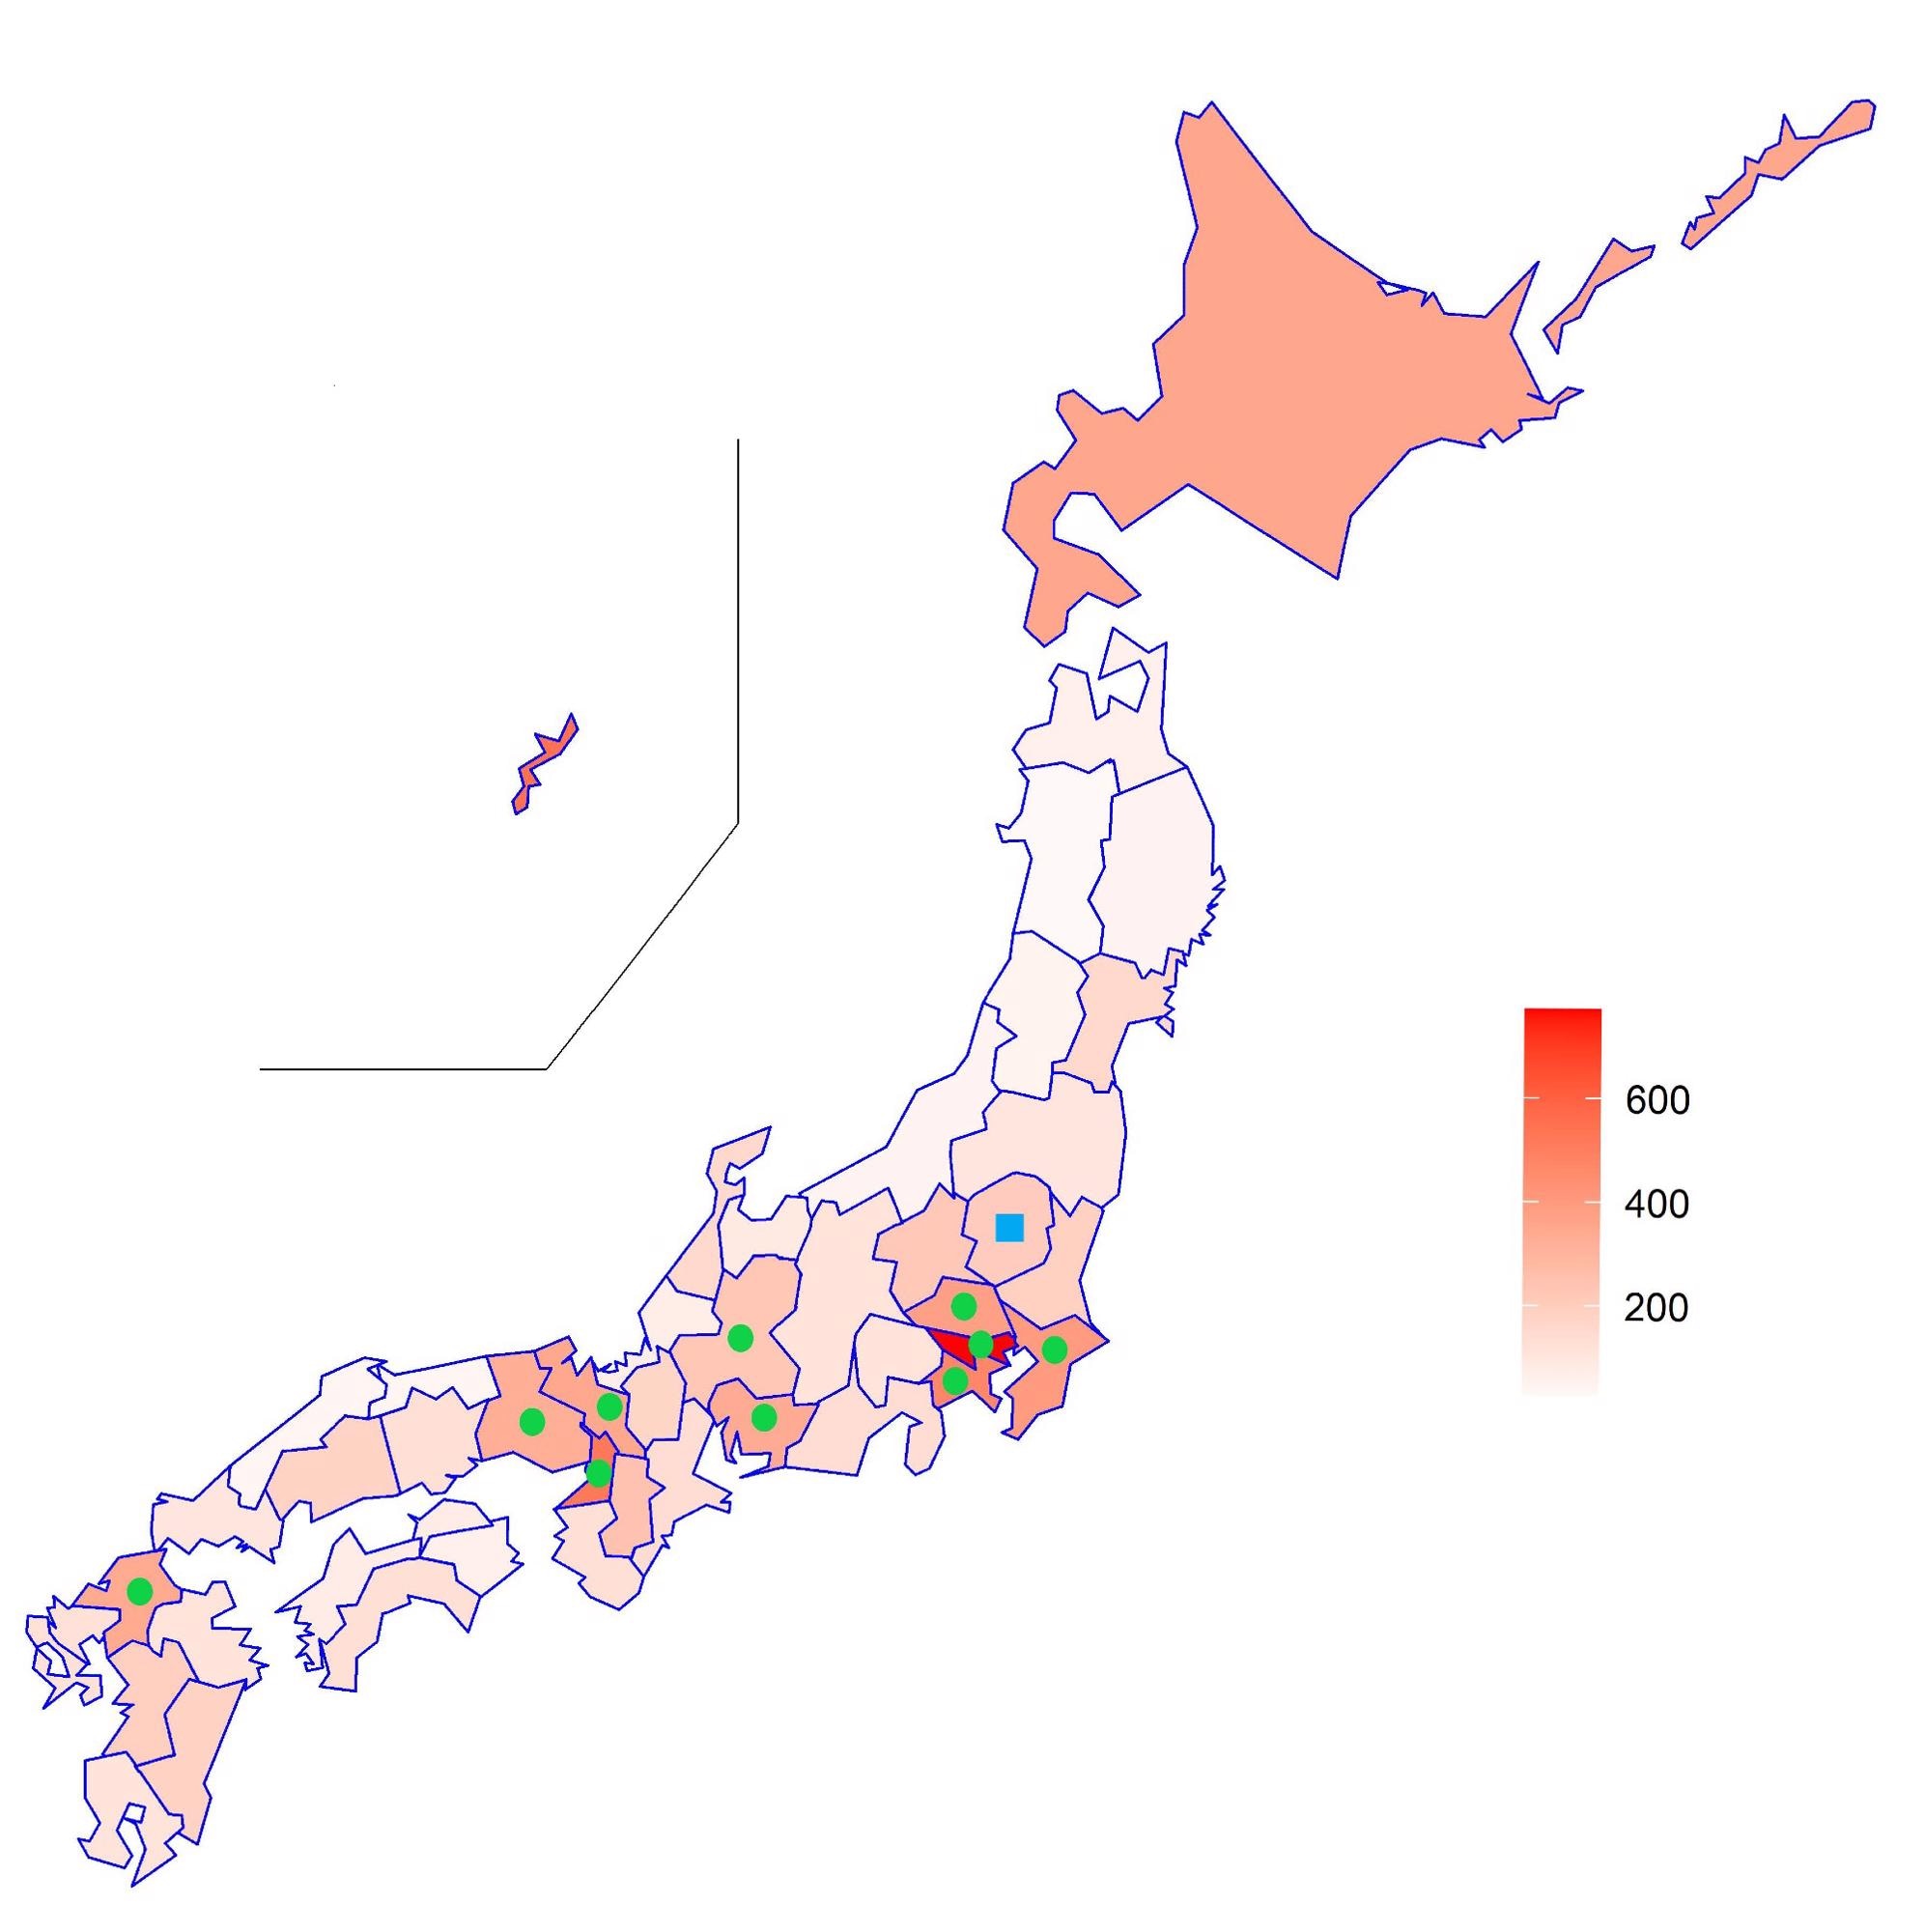 Infection Rate across Prefectures. Note; The infection rate is per 100,000 persons. Circles represent the 10 prefectures that declared SE in January and continued till the end of February. The square represents Tochigi prefecture, which declared the SE in January but lifted it on February 7th.